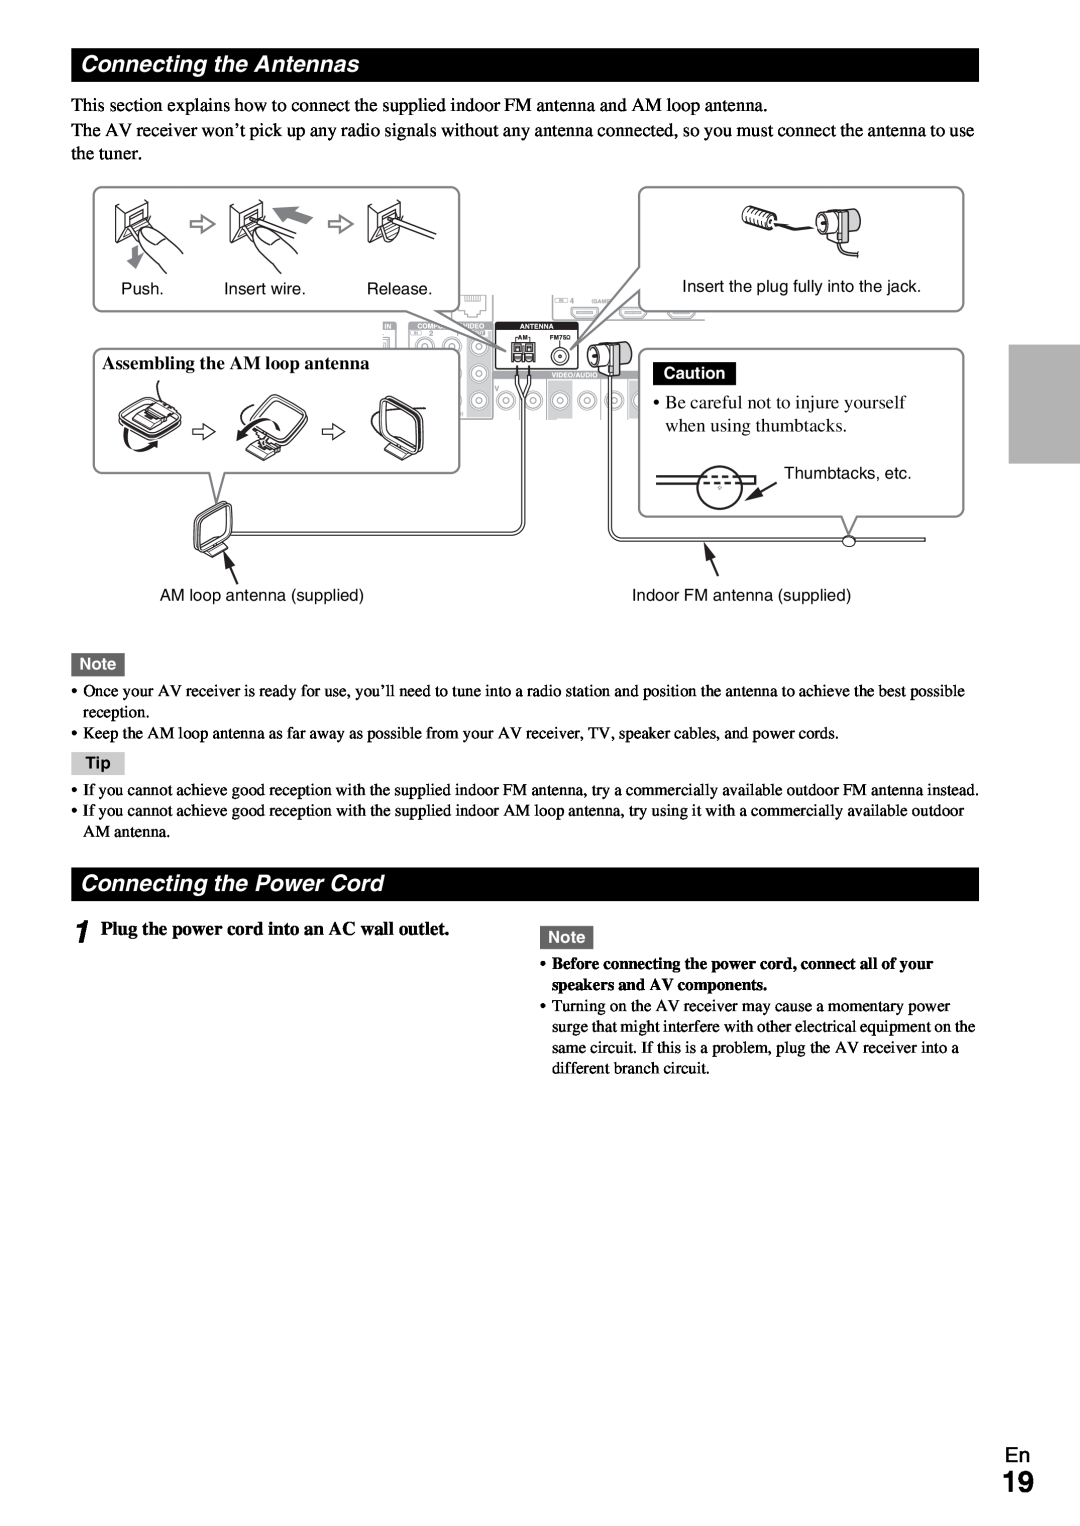 Onkyo HT-R690 instruction manual Connecting the Antennas, Connecting the Power Cord, Assembling the AM loop antenna 